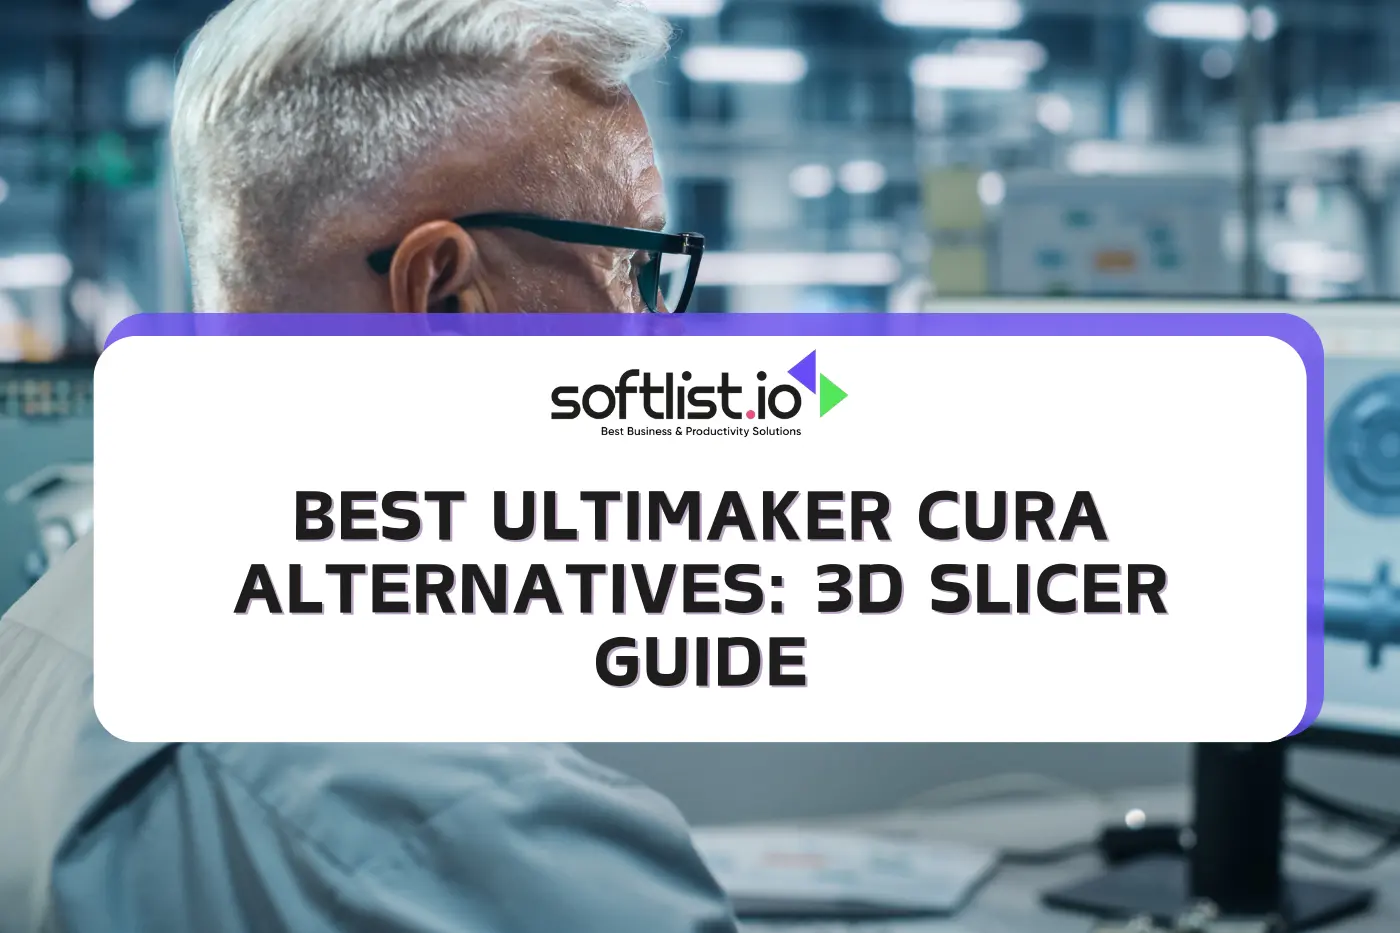 7 Best Ultimaker Cura Alternatives for 3D Printing Enthusiasts